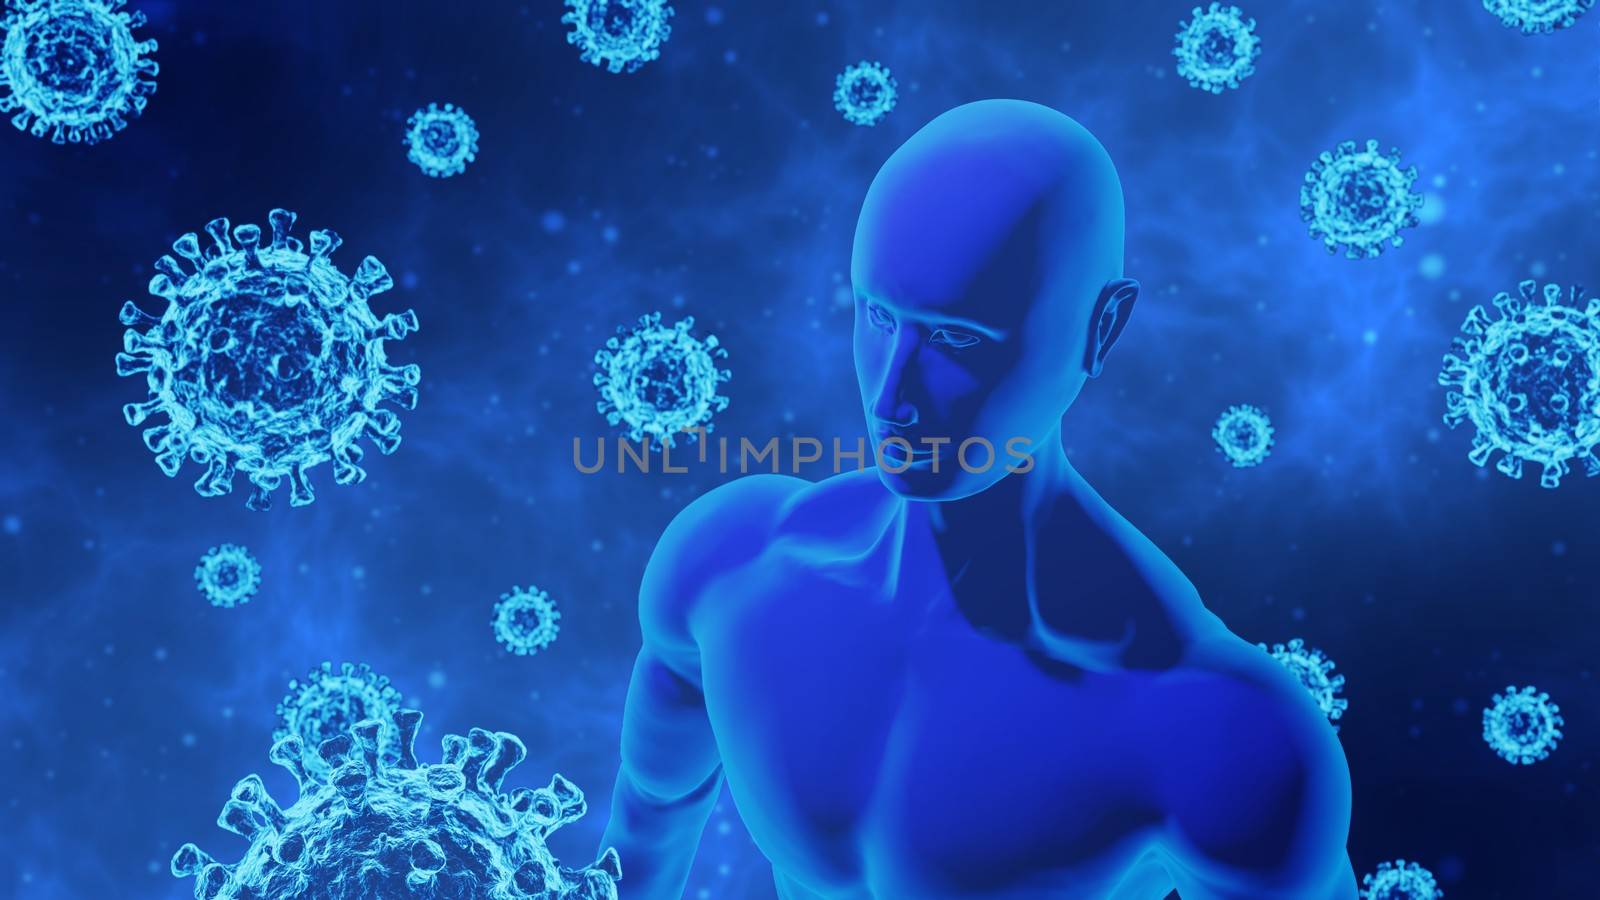 3D Rendering Virus/COVID-19 and Human/AI Body Model in Abstract Blue Background Still Image